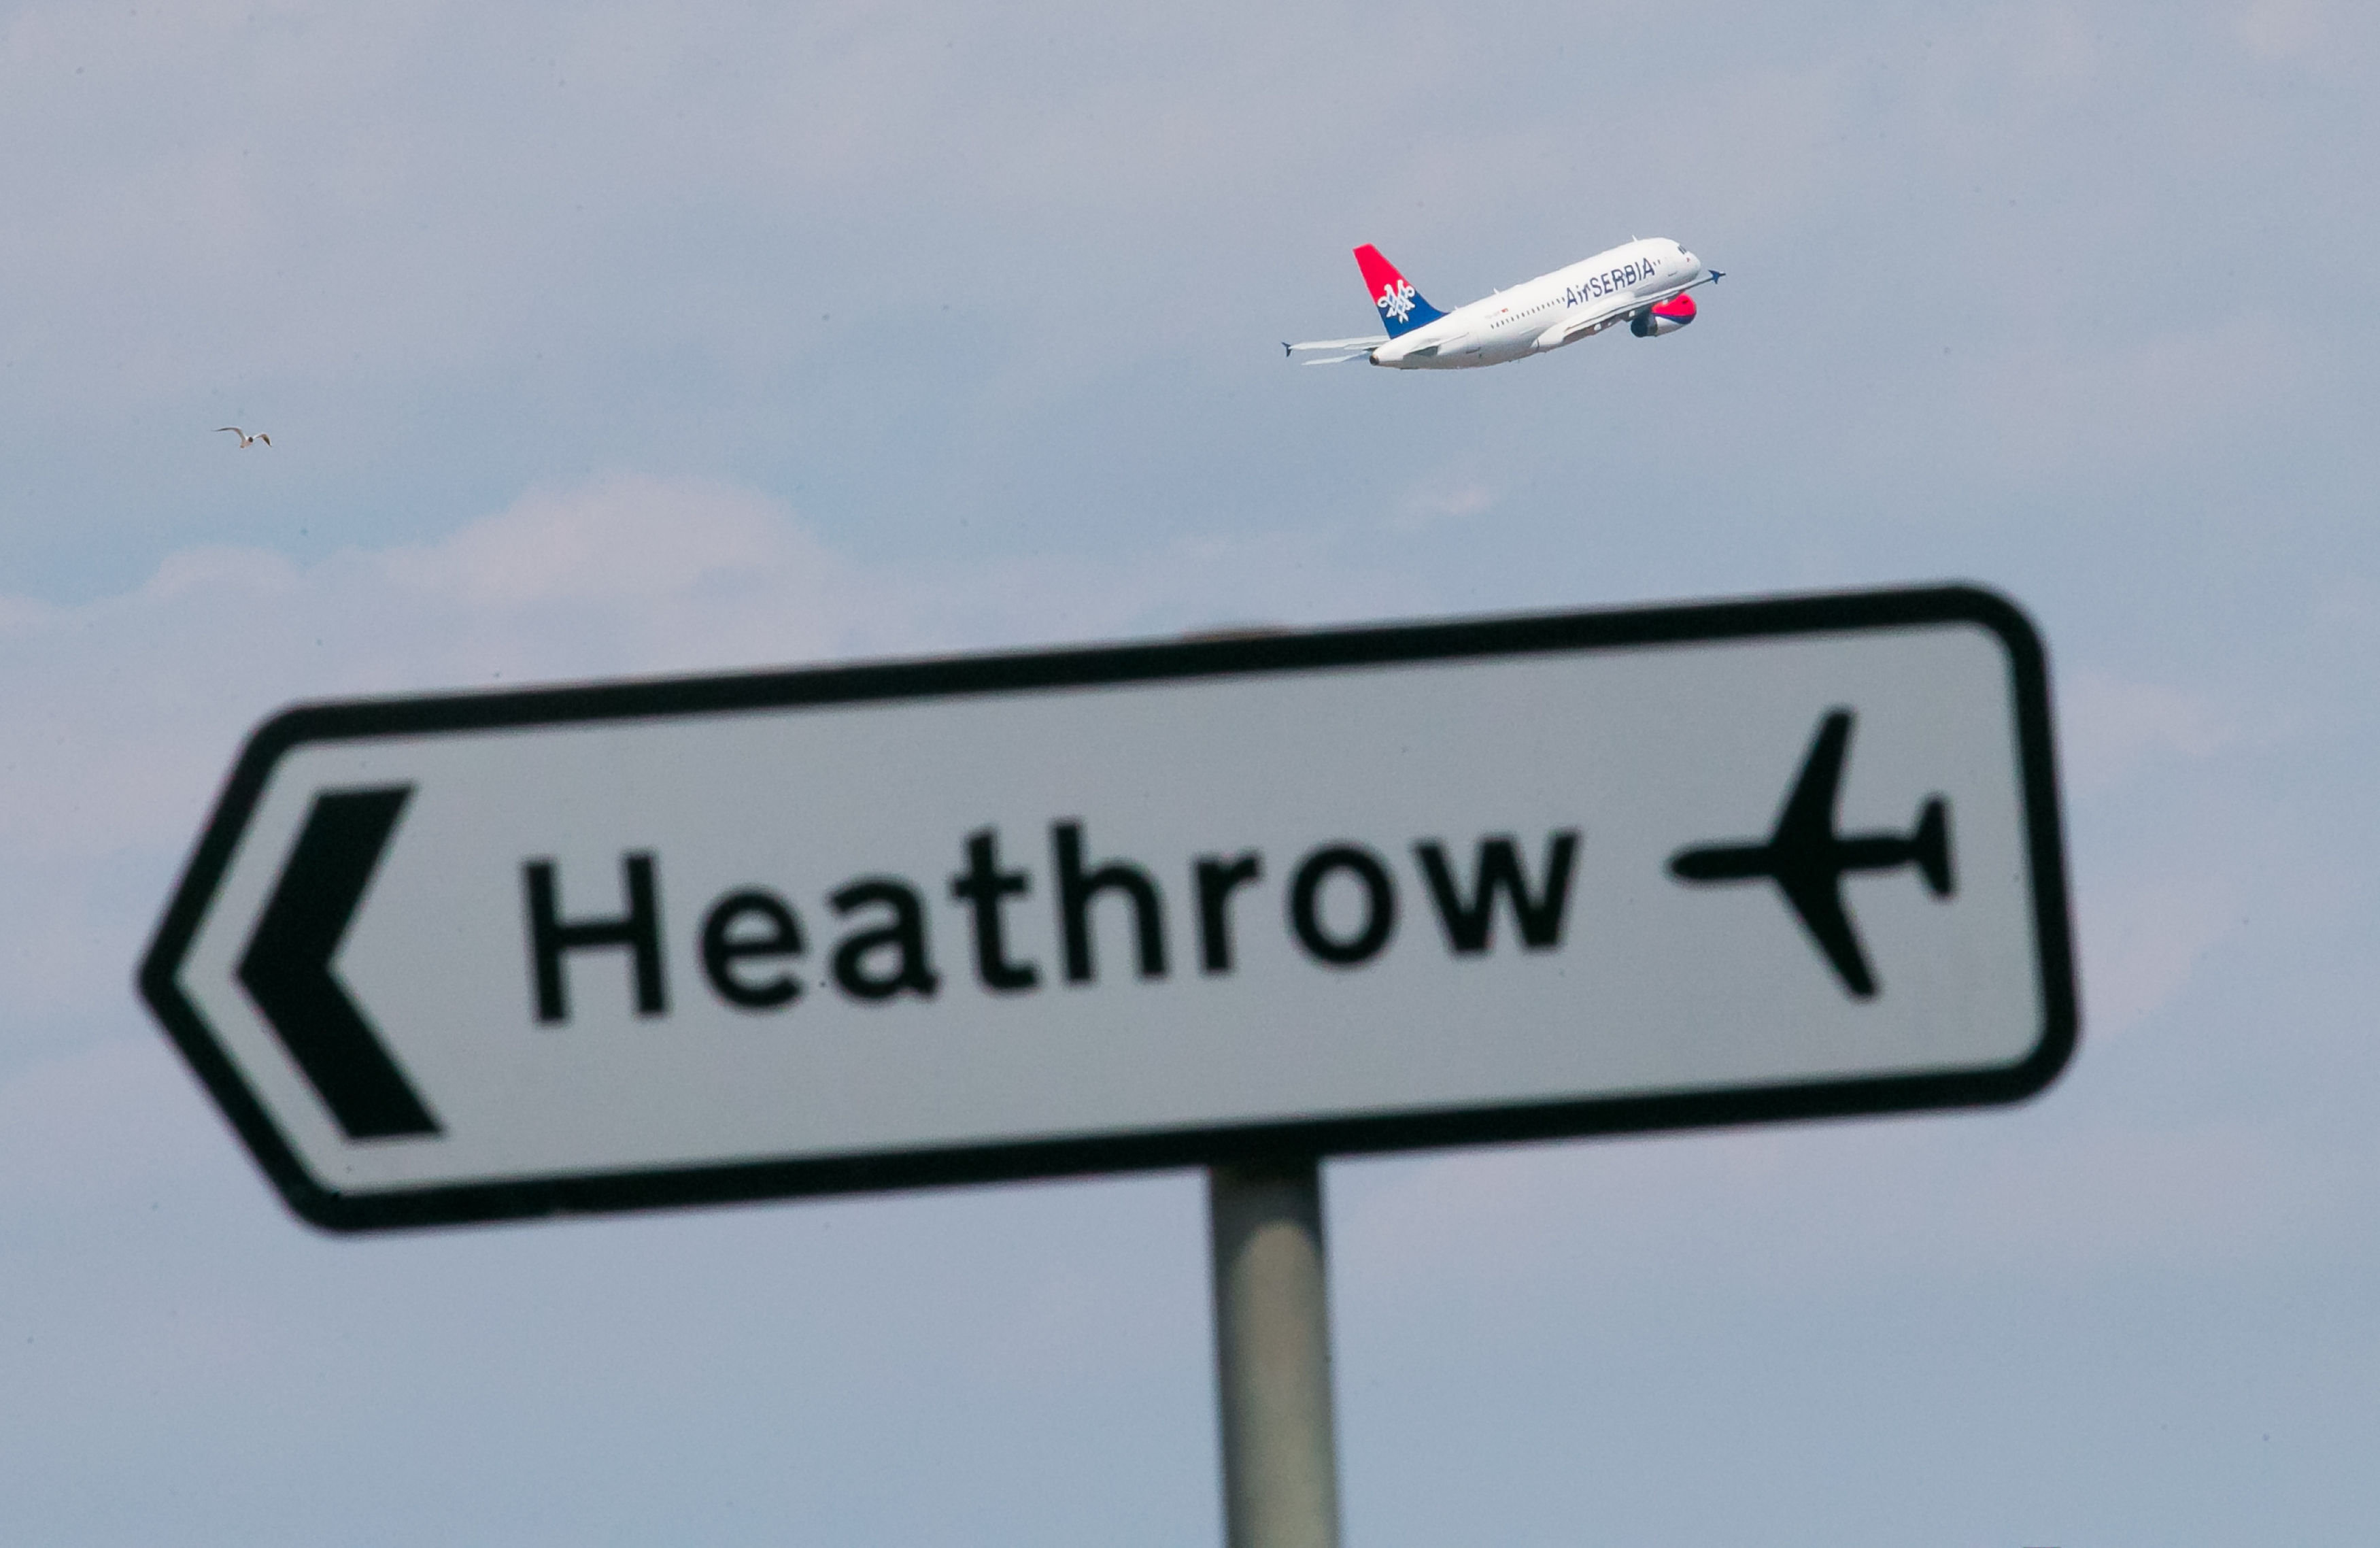 <strong>The accident occurred at Heathrow Airport at around 6am on Wednesday&nbsp;</strong>